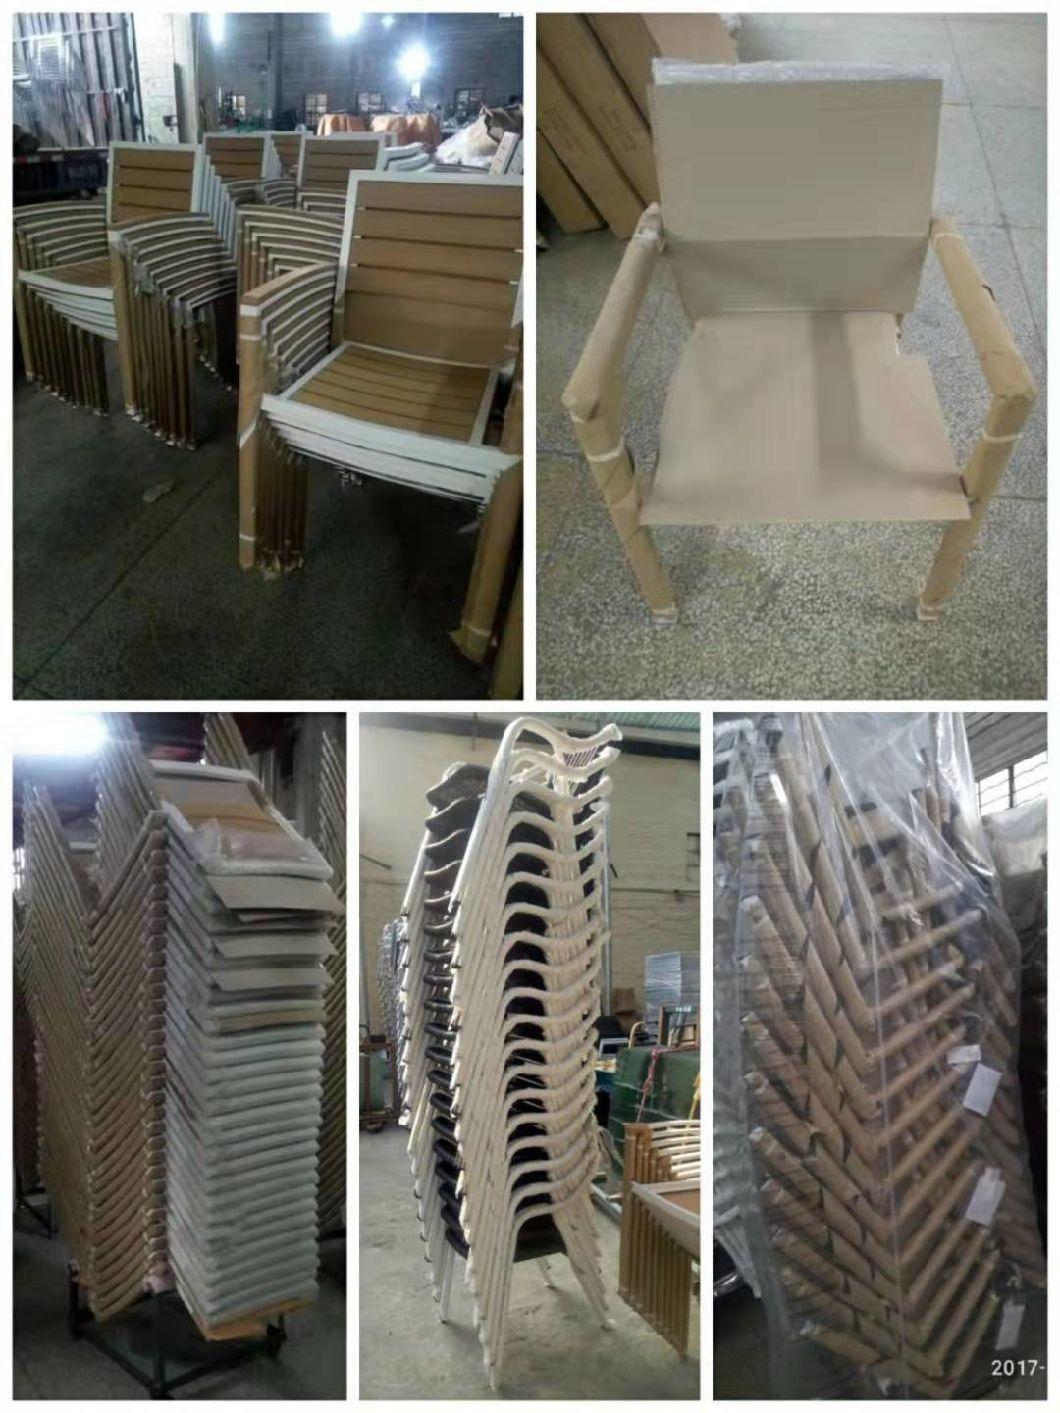 Stackable Polywood Aluminum Chair for Outdoor